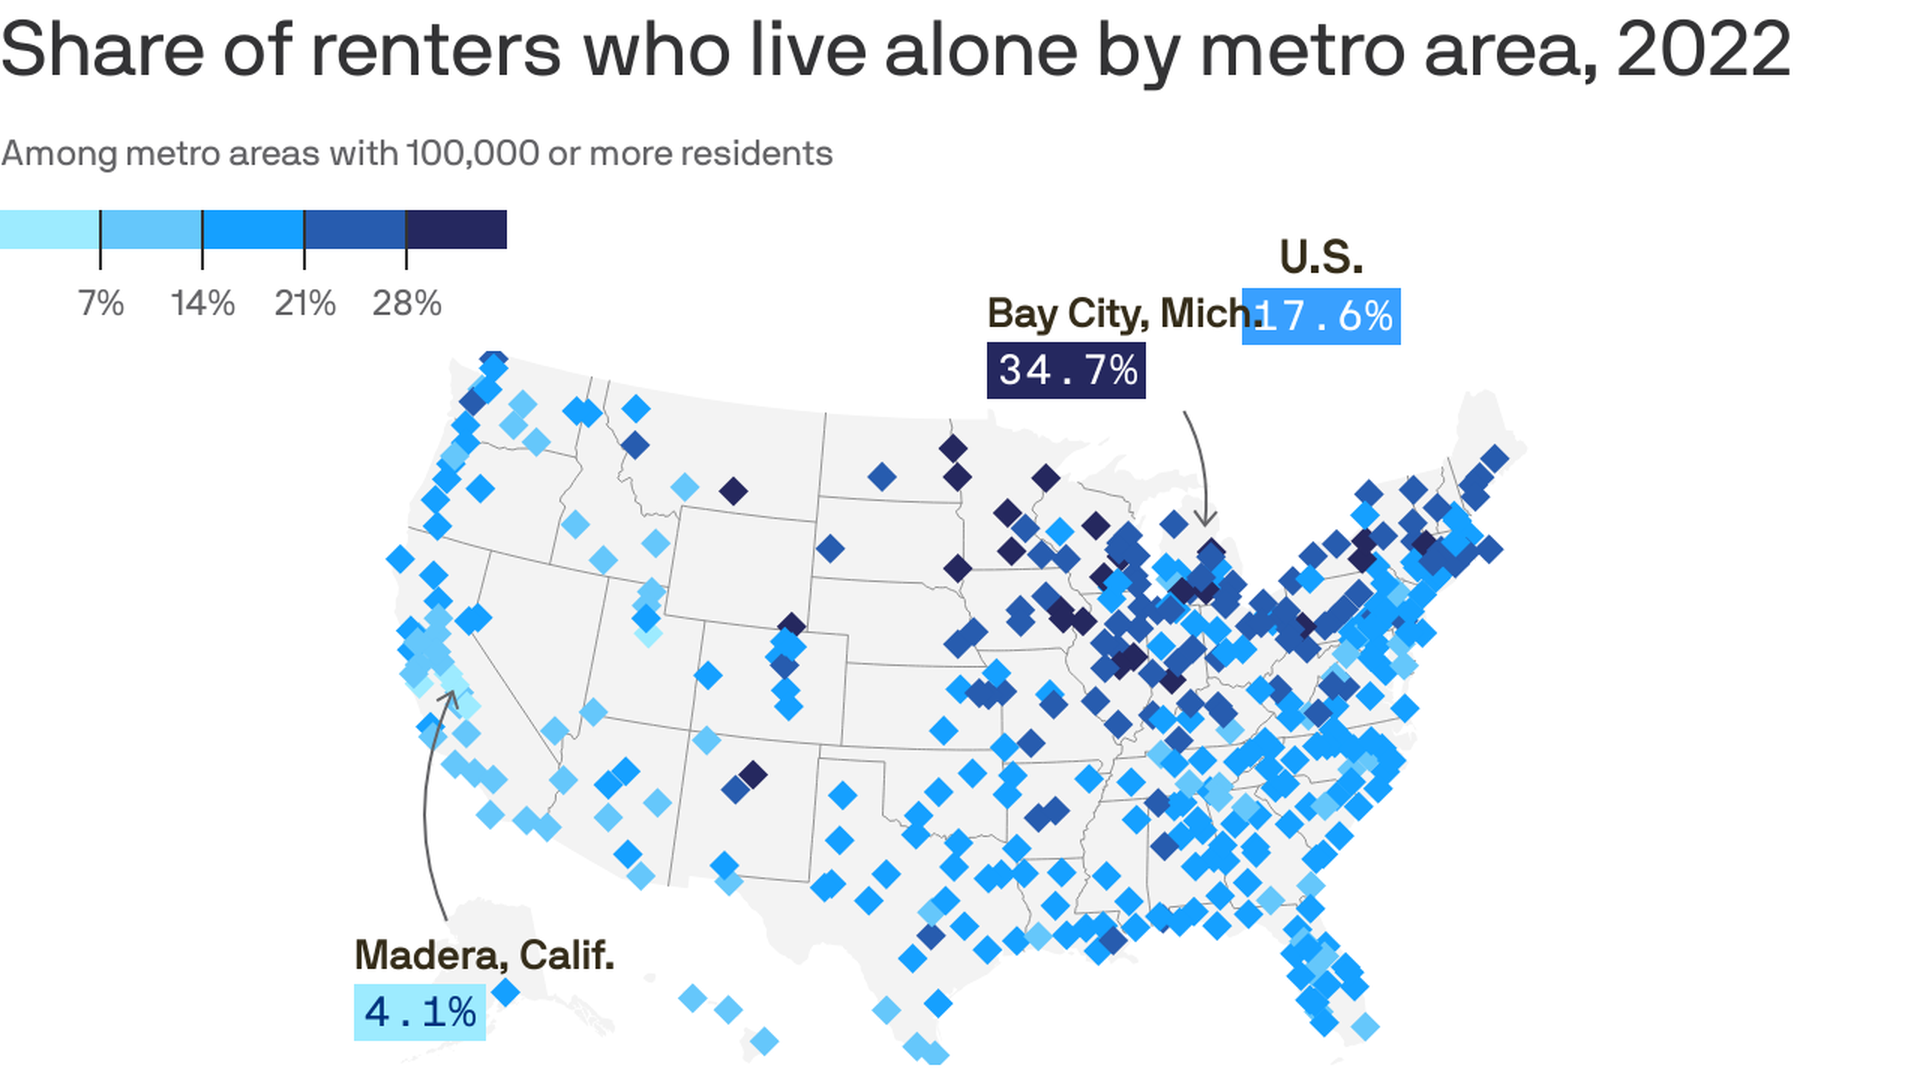 A map showing the share of renters who live alone by metro area in 2022. The top highlights 17.6% for all of the U.S. and 34.7% for Bay City, Michigan.